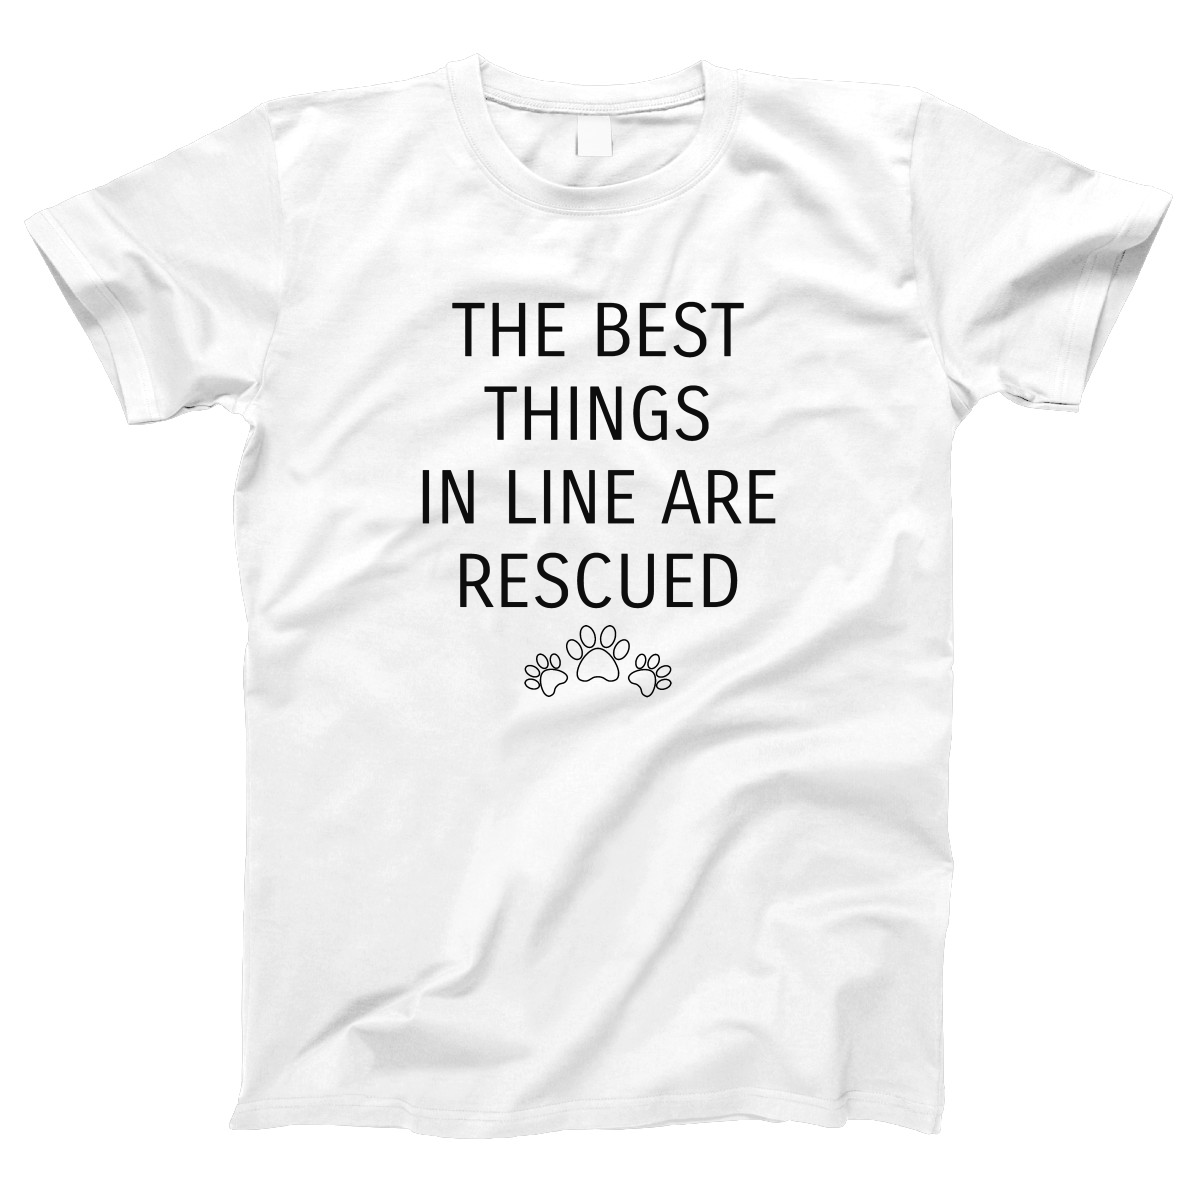 The Best Things In Life Are Rescued Women's T-shirt | White